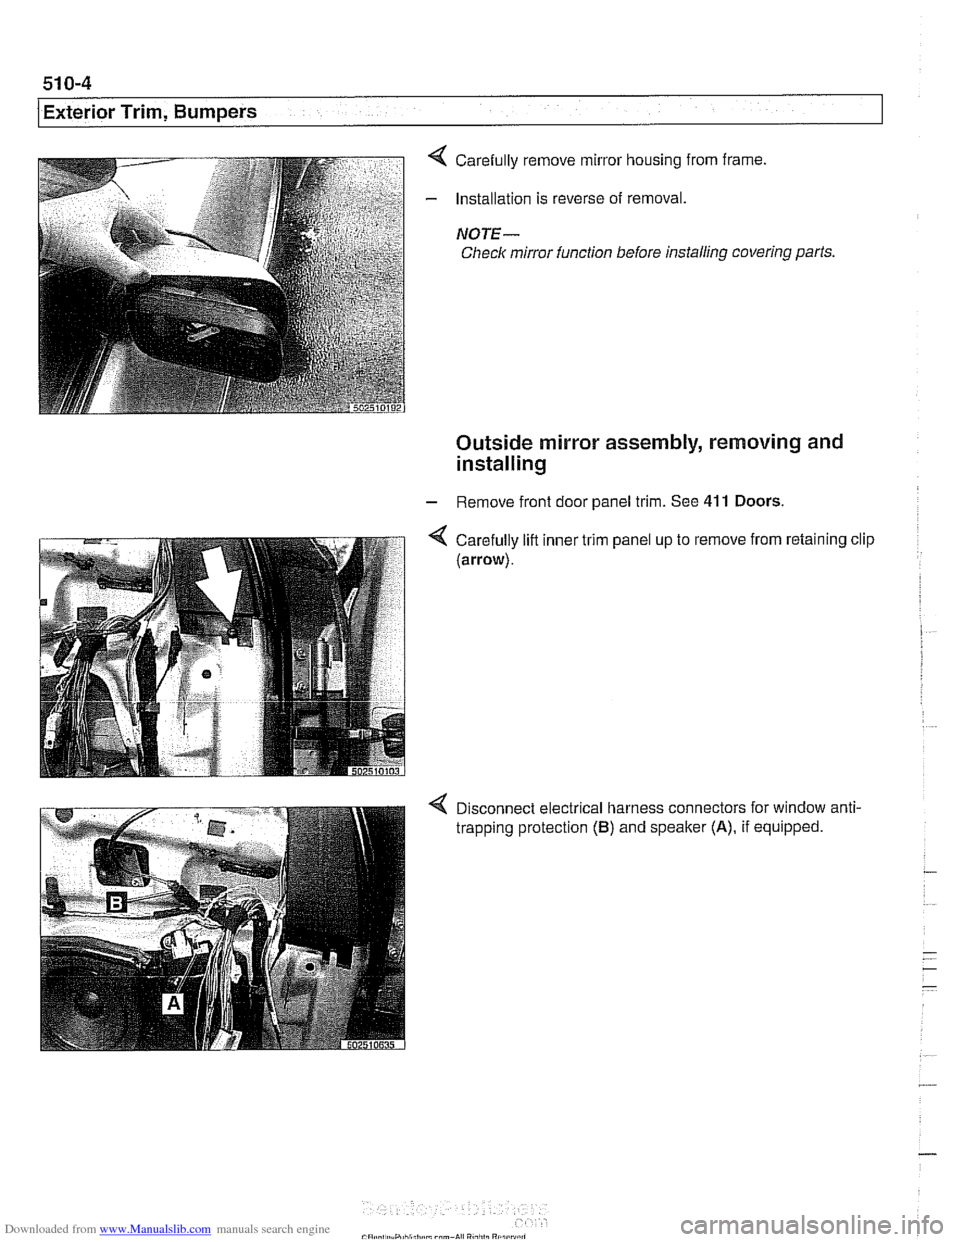 BMW 525i 2001 E39 Owners Manual Downloaded from www.Manualslib.com manuals search engine 
51 0-4 
I Exterior Trim. Bumpers 
4 Carefully remove mirror housing from frame 
- Installation  is reverse  of removal. 
NOTE- 
Check  mirror 